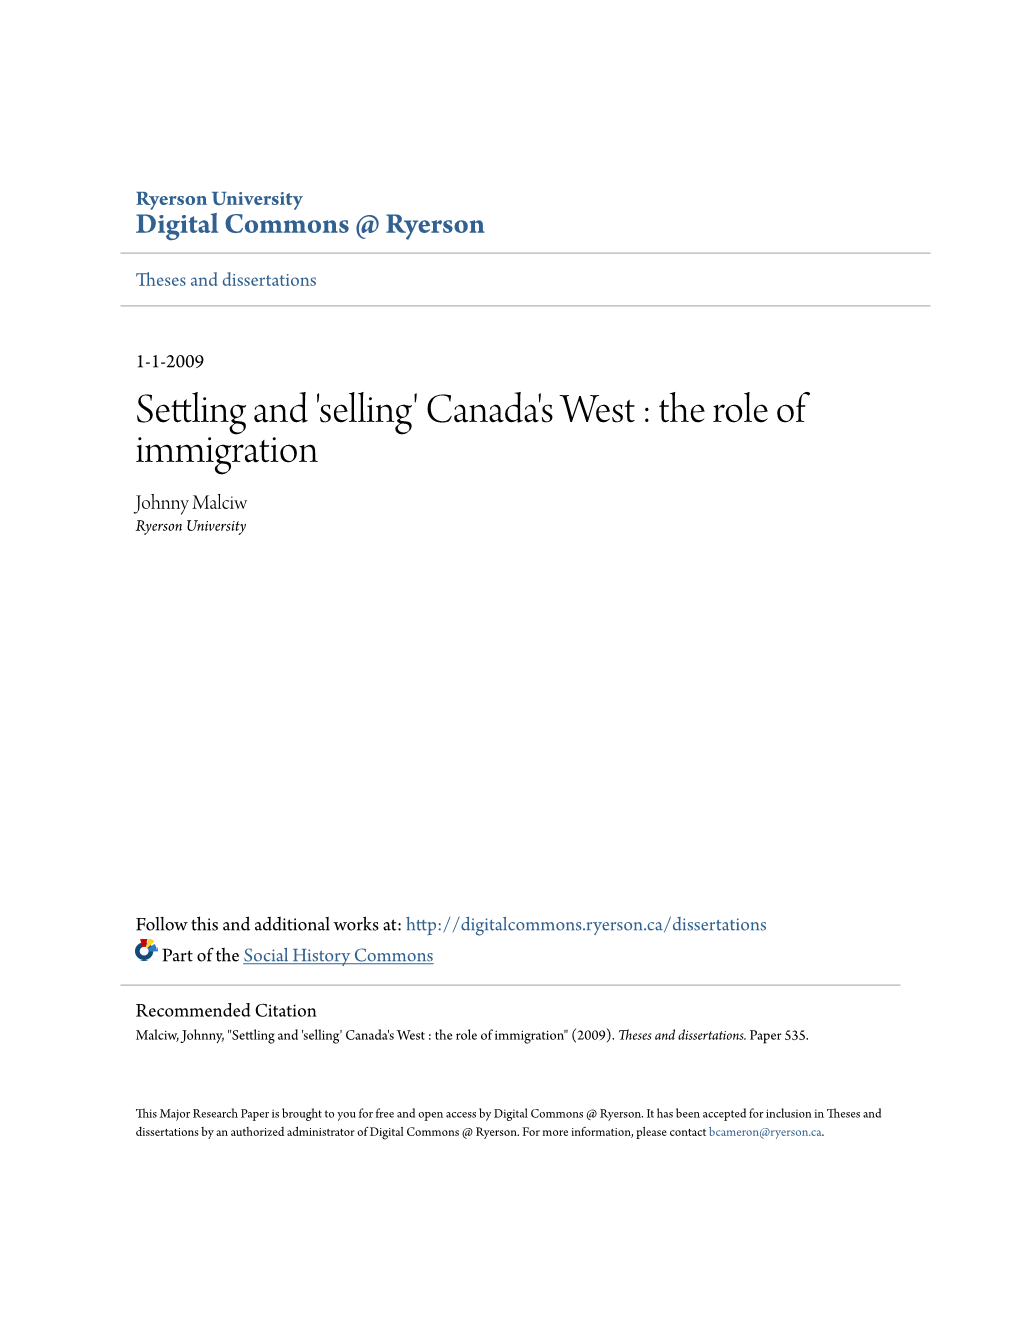 Settling and 'Selling' Canada's West : the Role of Immigration Johnny Malciw Ryerson University